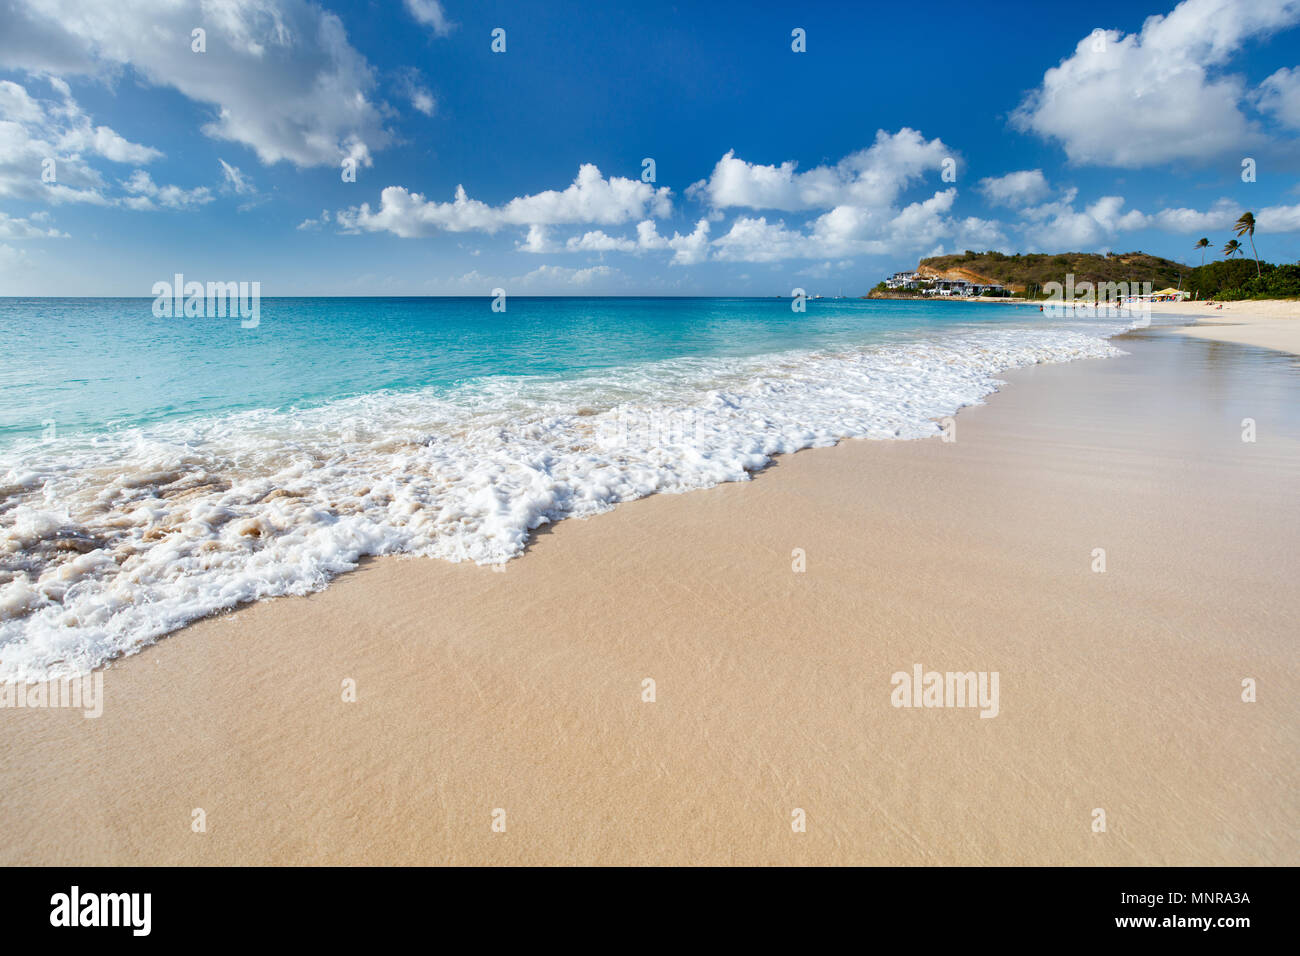 Idyllic tropical Darkwood beach at Antigua island in Caribbean with white sand,  turquoise ocean water and blue sky Stock Photo